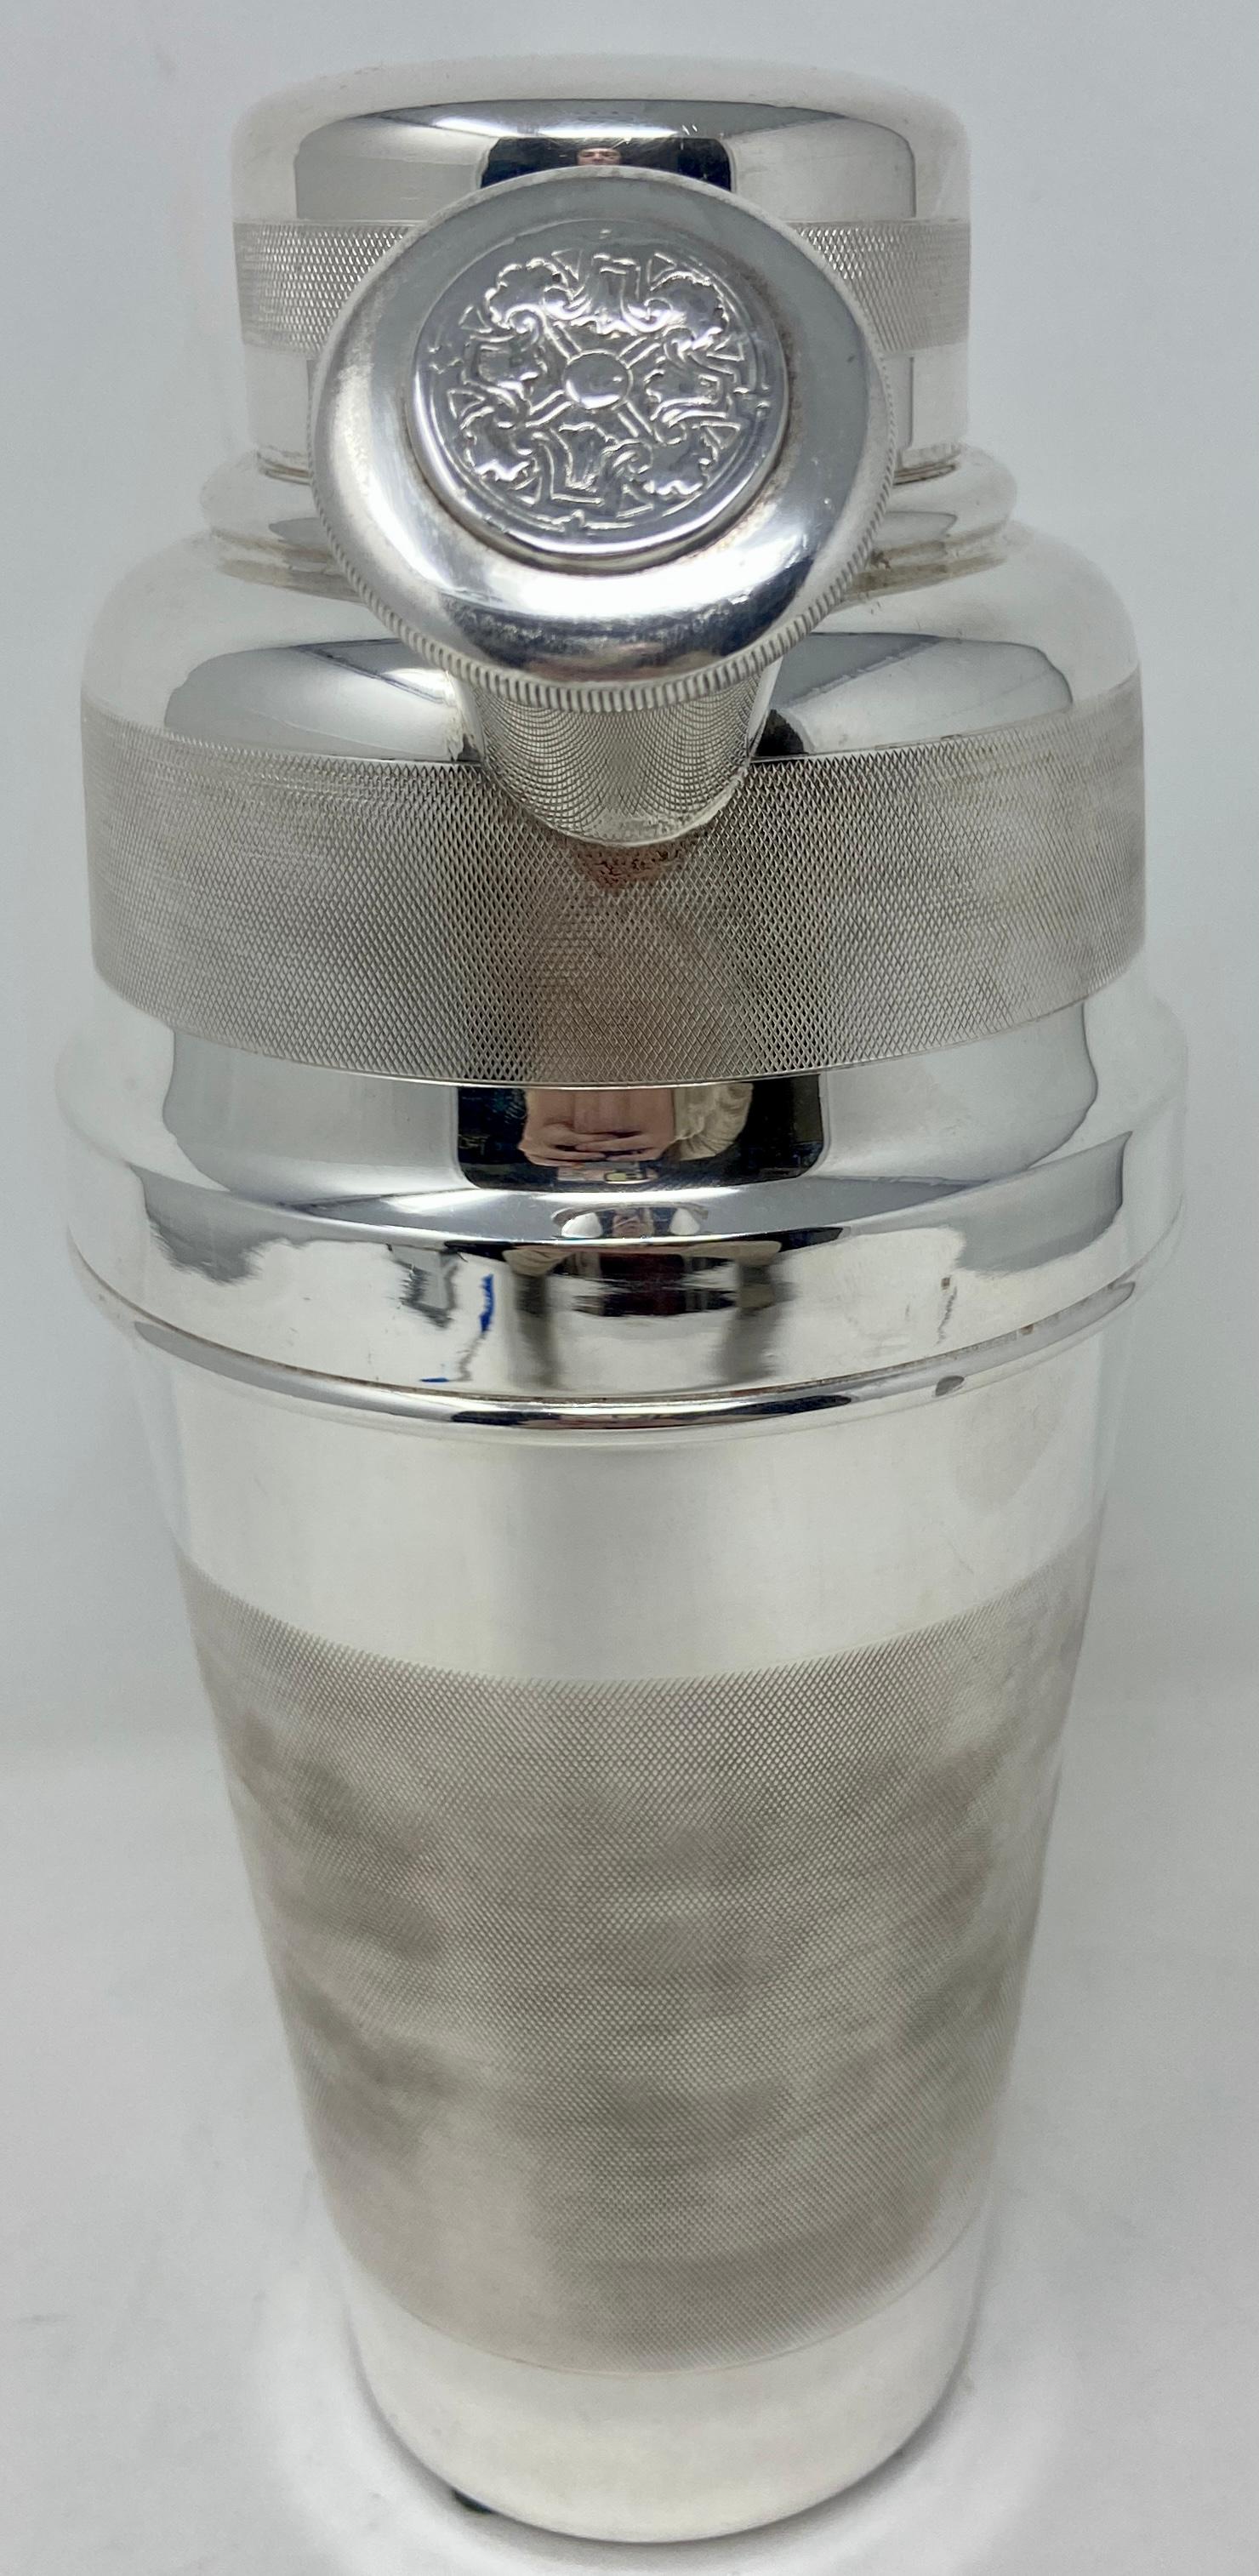 20th Century Antique English Art Deco Silver-Plated Hallmarked Cocktail Shaker, Circa 1920s